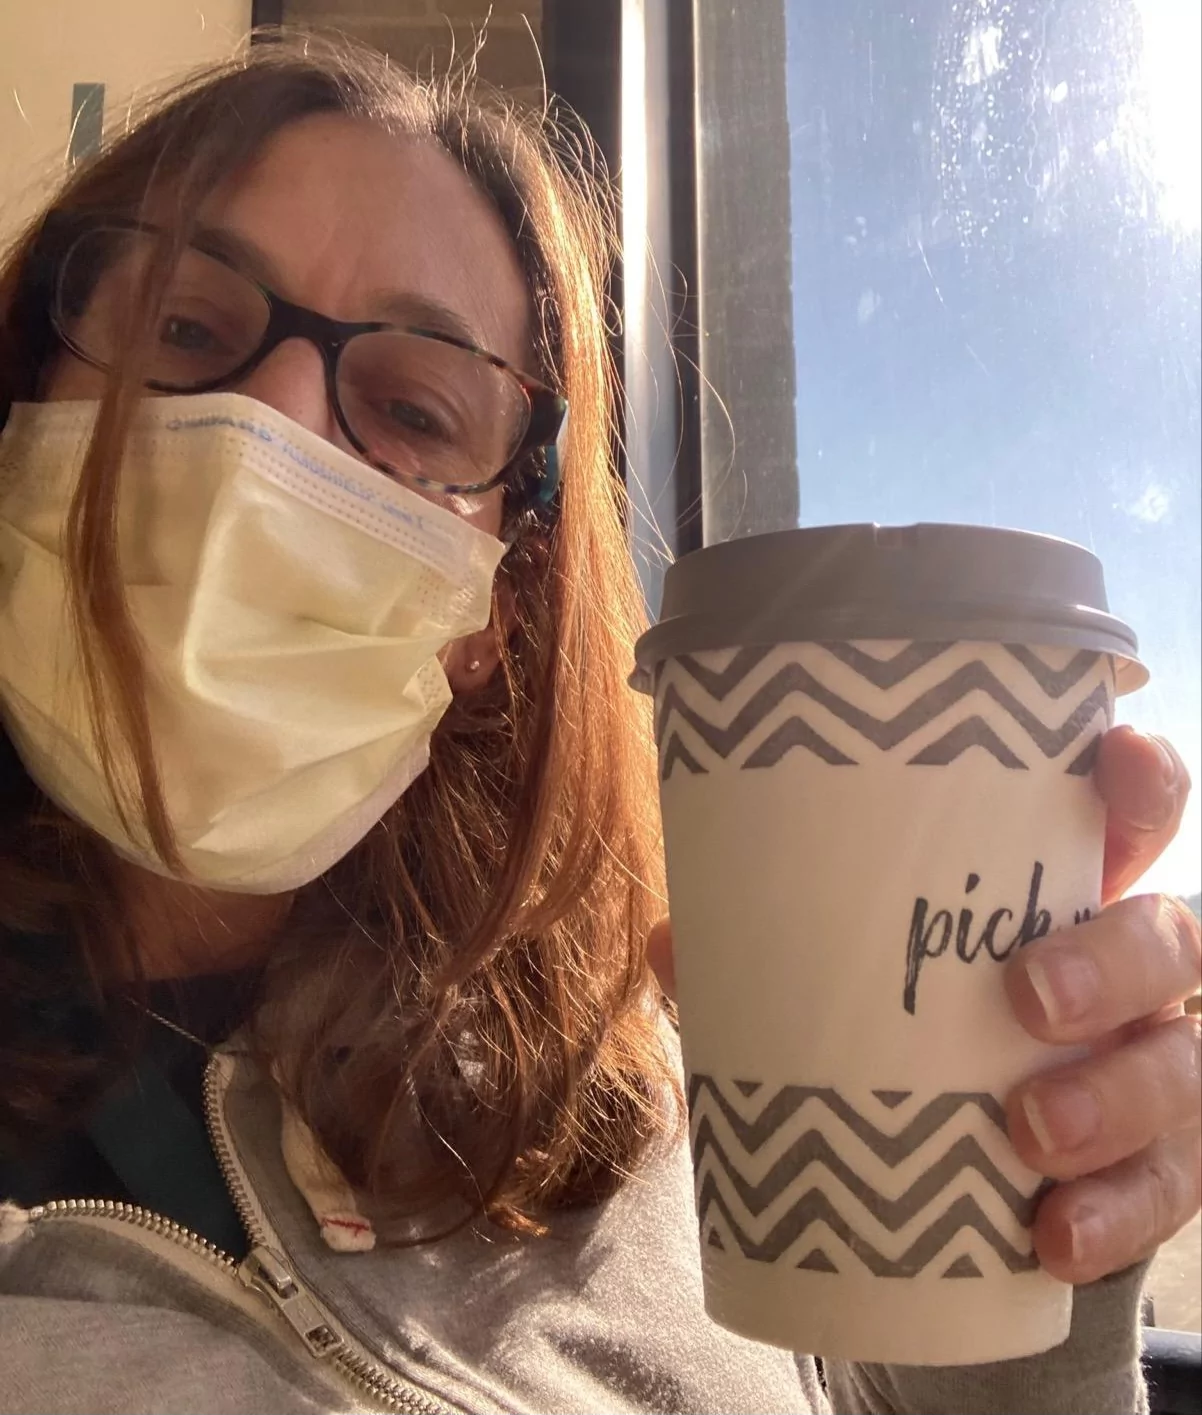 Sherry holding a cup of coffee, while wearing a mask in front of the window of her hospital room